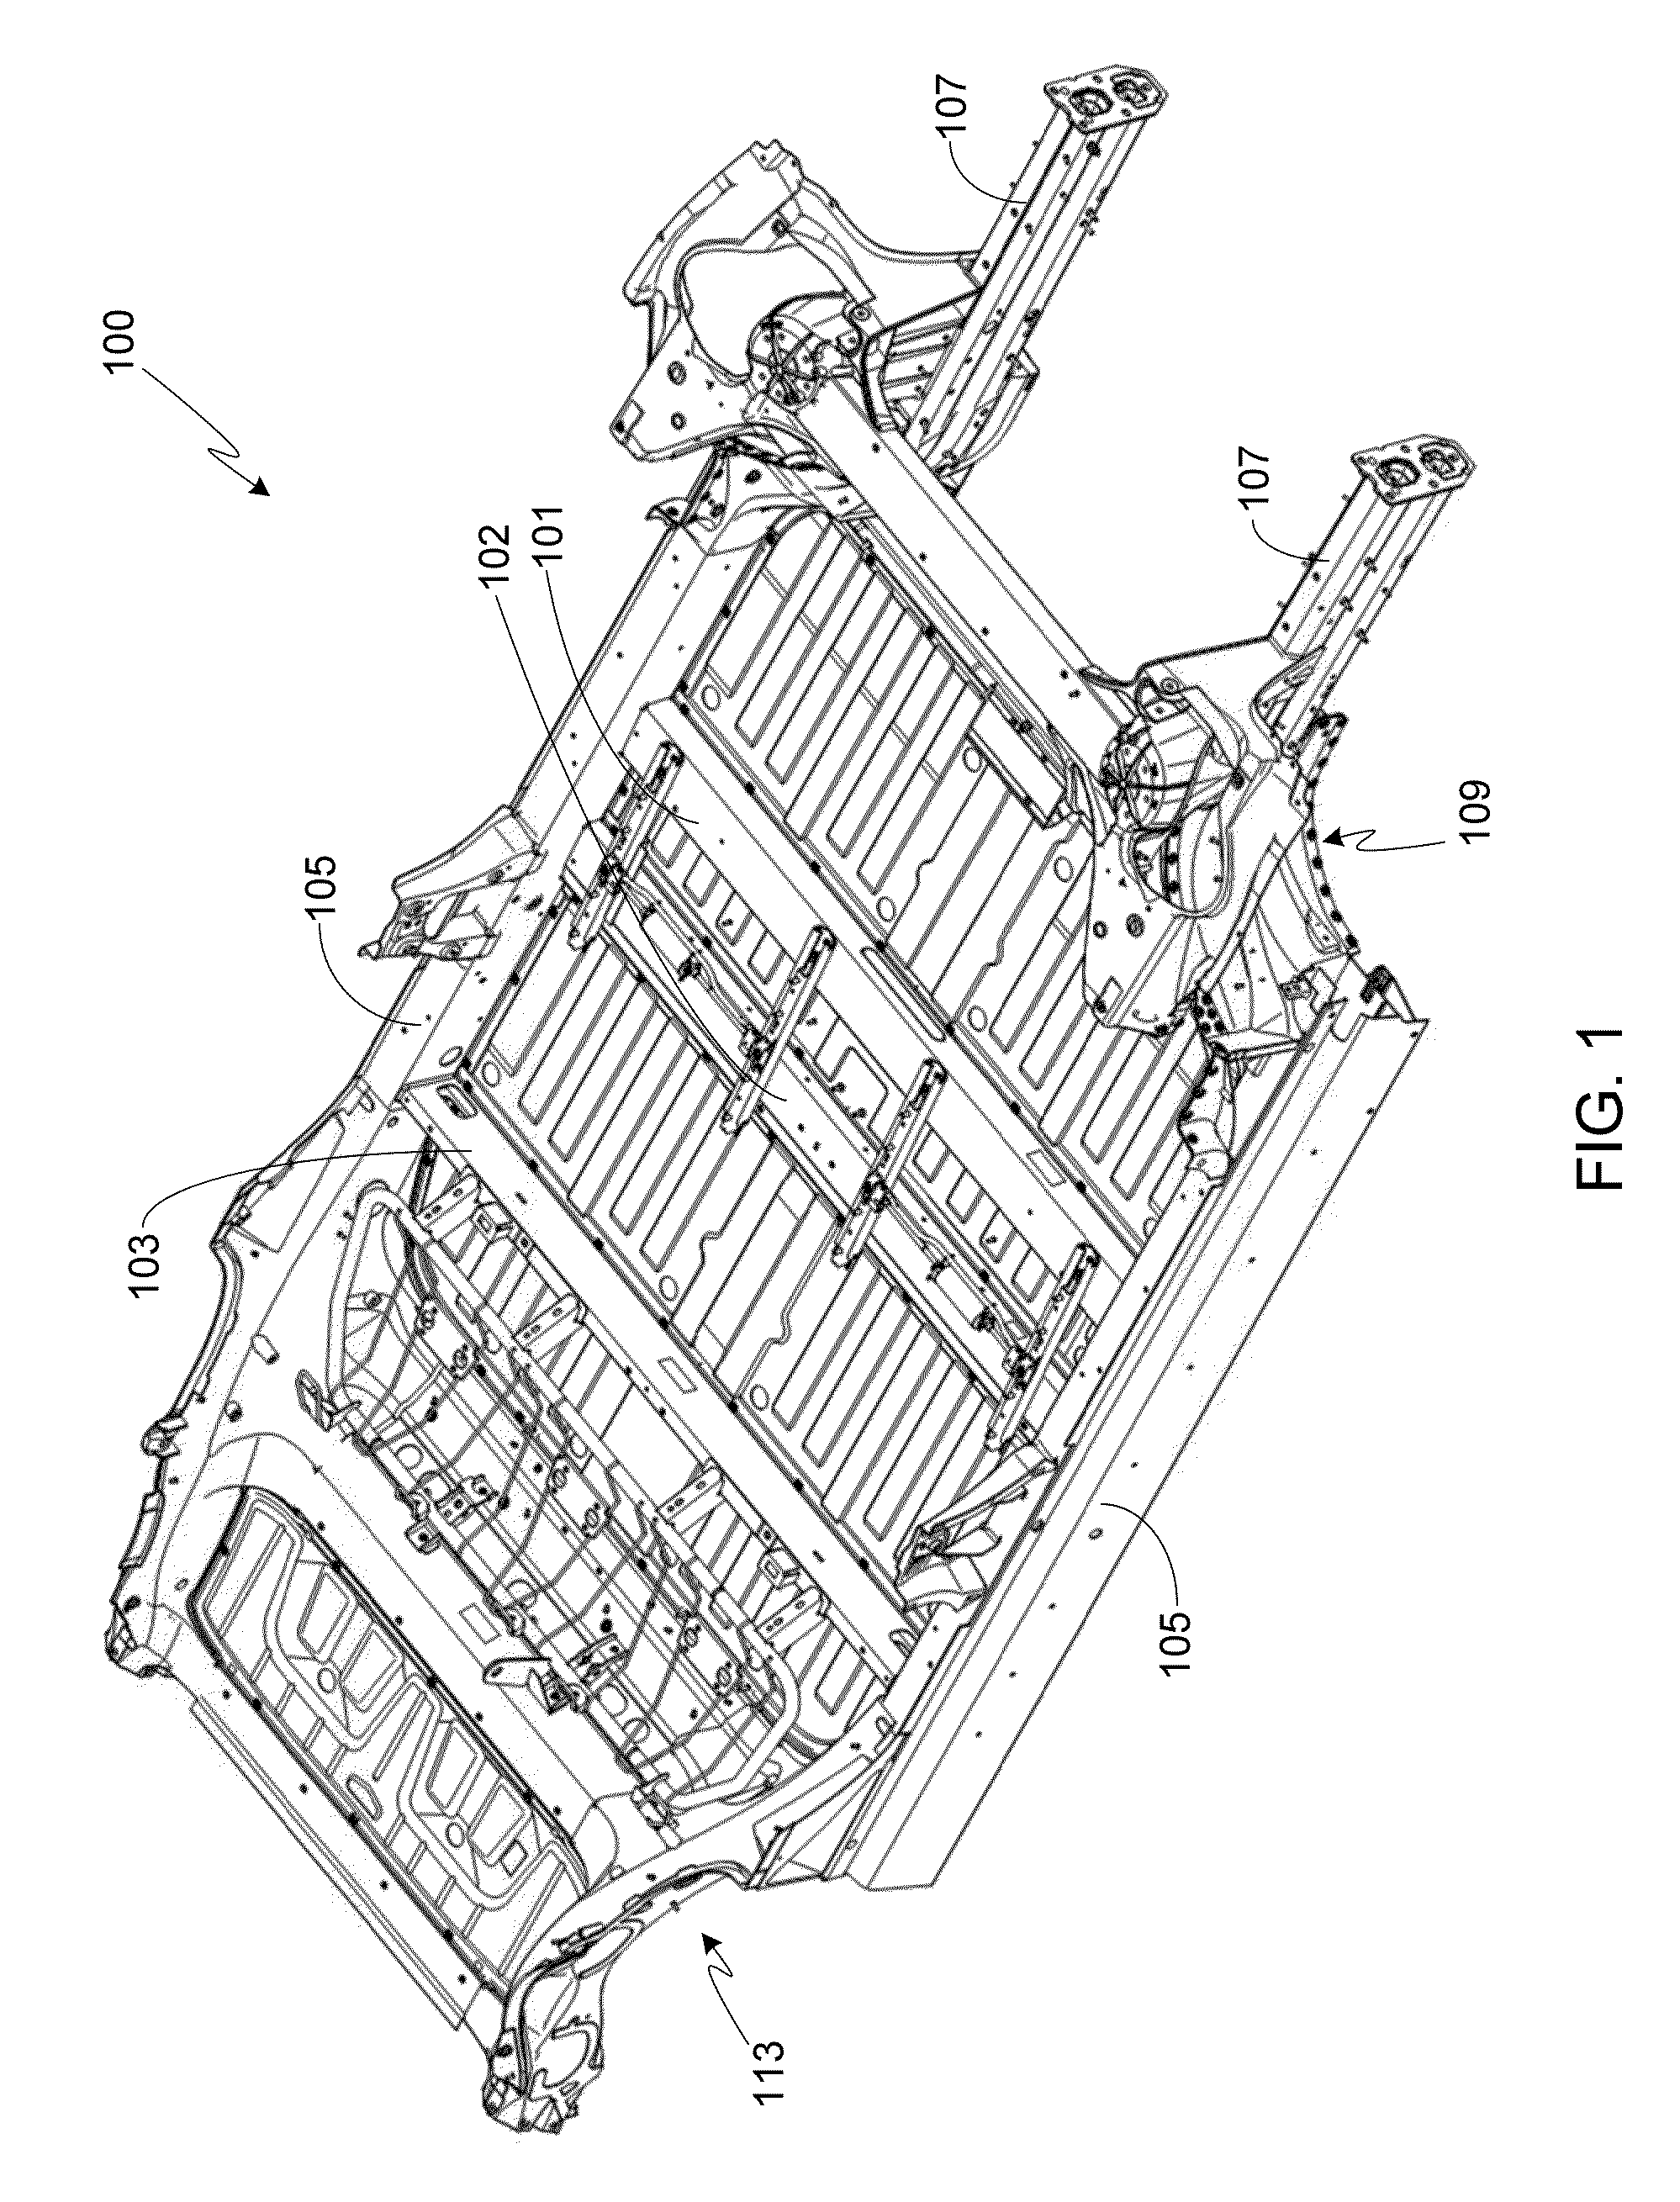 System for Absorbing and Distributing Side Impact Energy Utilizing a Side Sill Assembly with a Collapsible Sill Insert